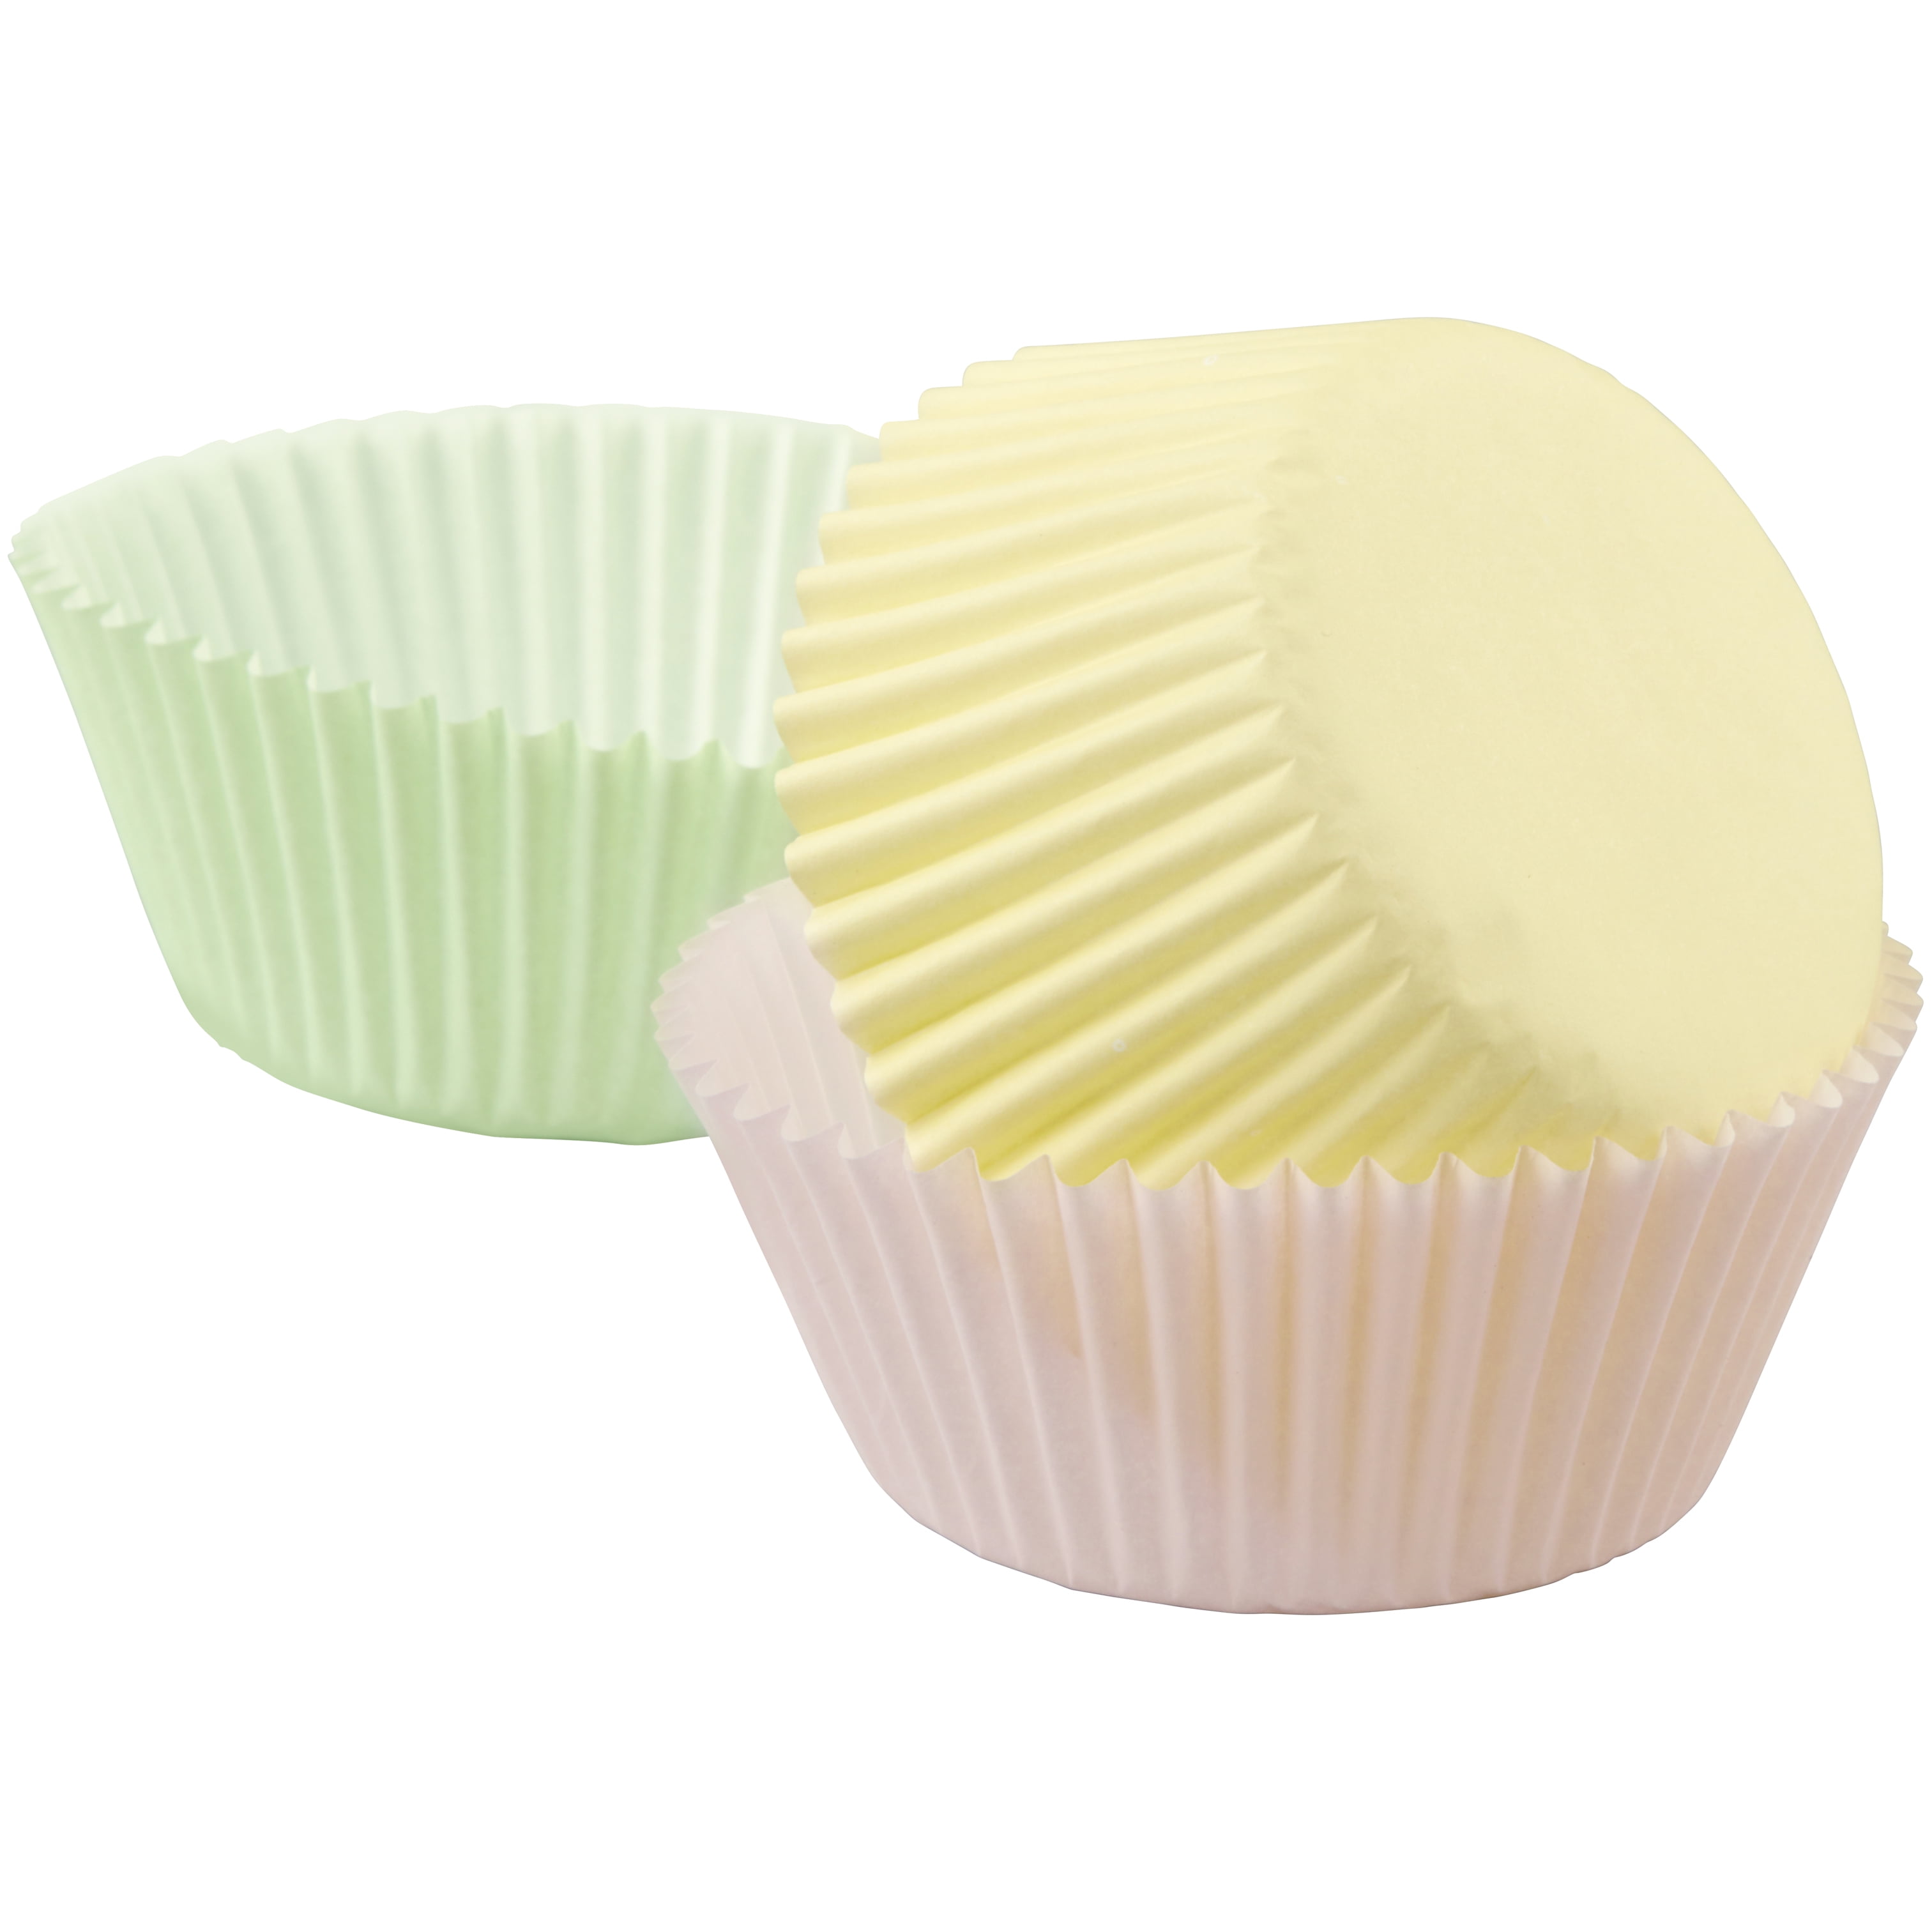 NEW Wilton ITS A GIRL 75 ct baking cups